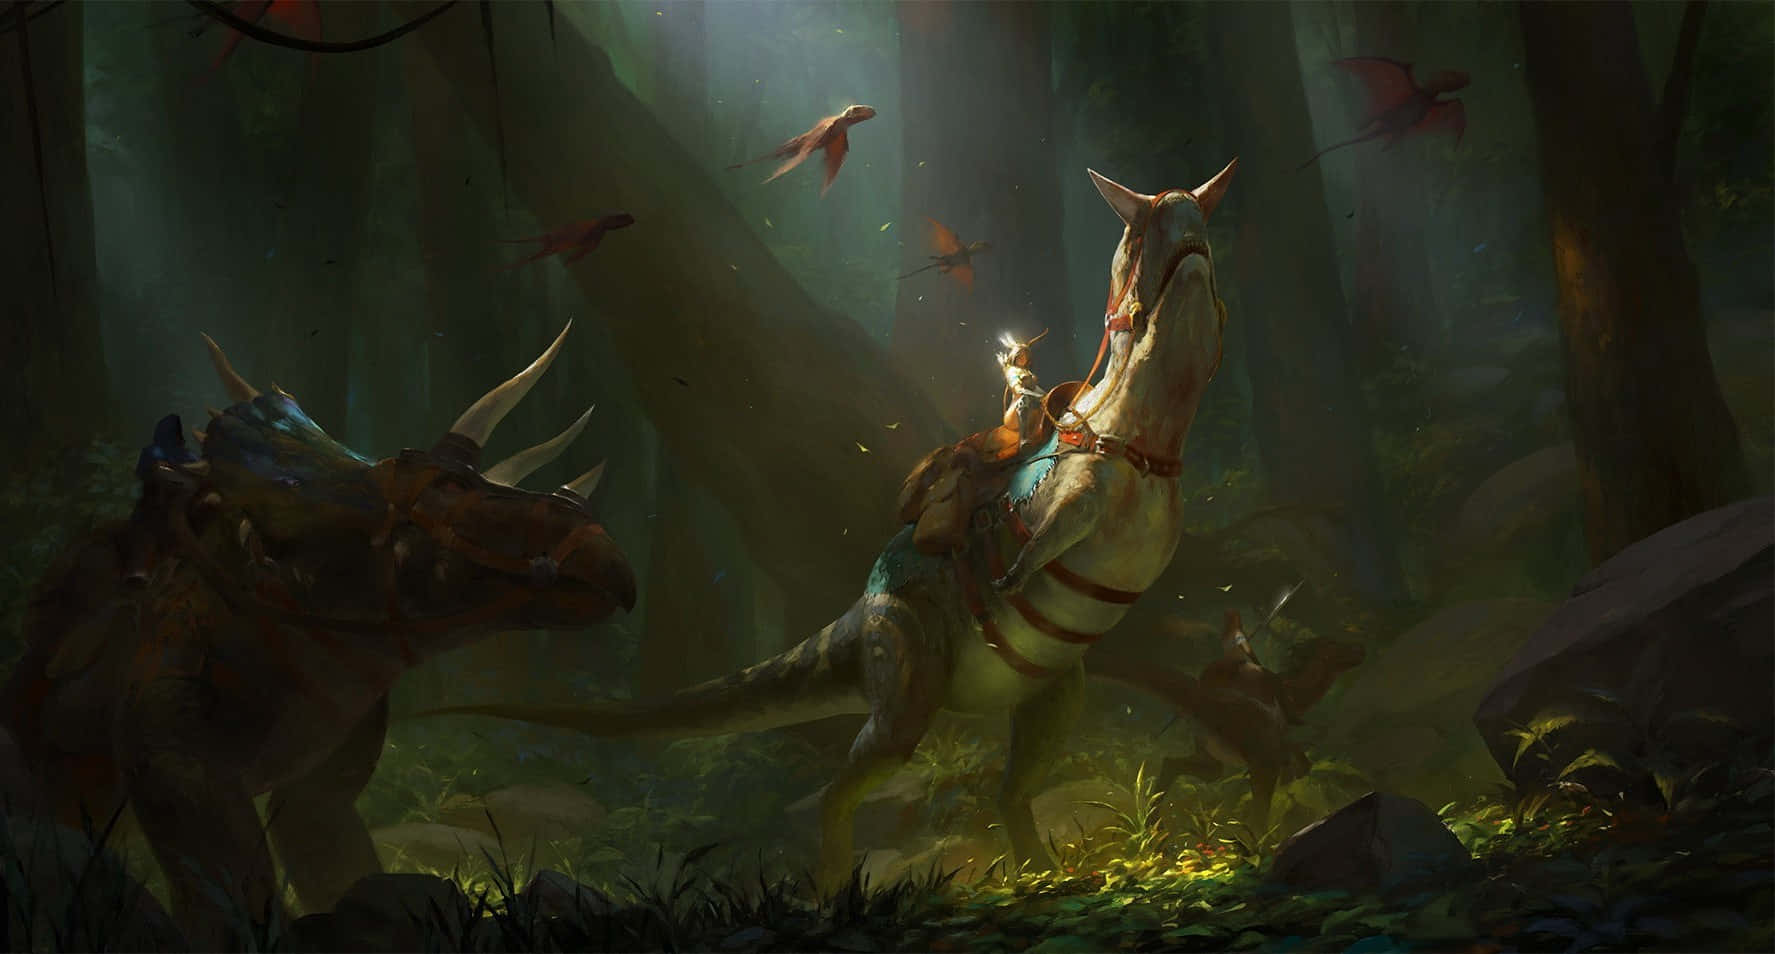 A Woman Riding A Dinosaur In The Forest Wallpaper